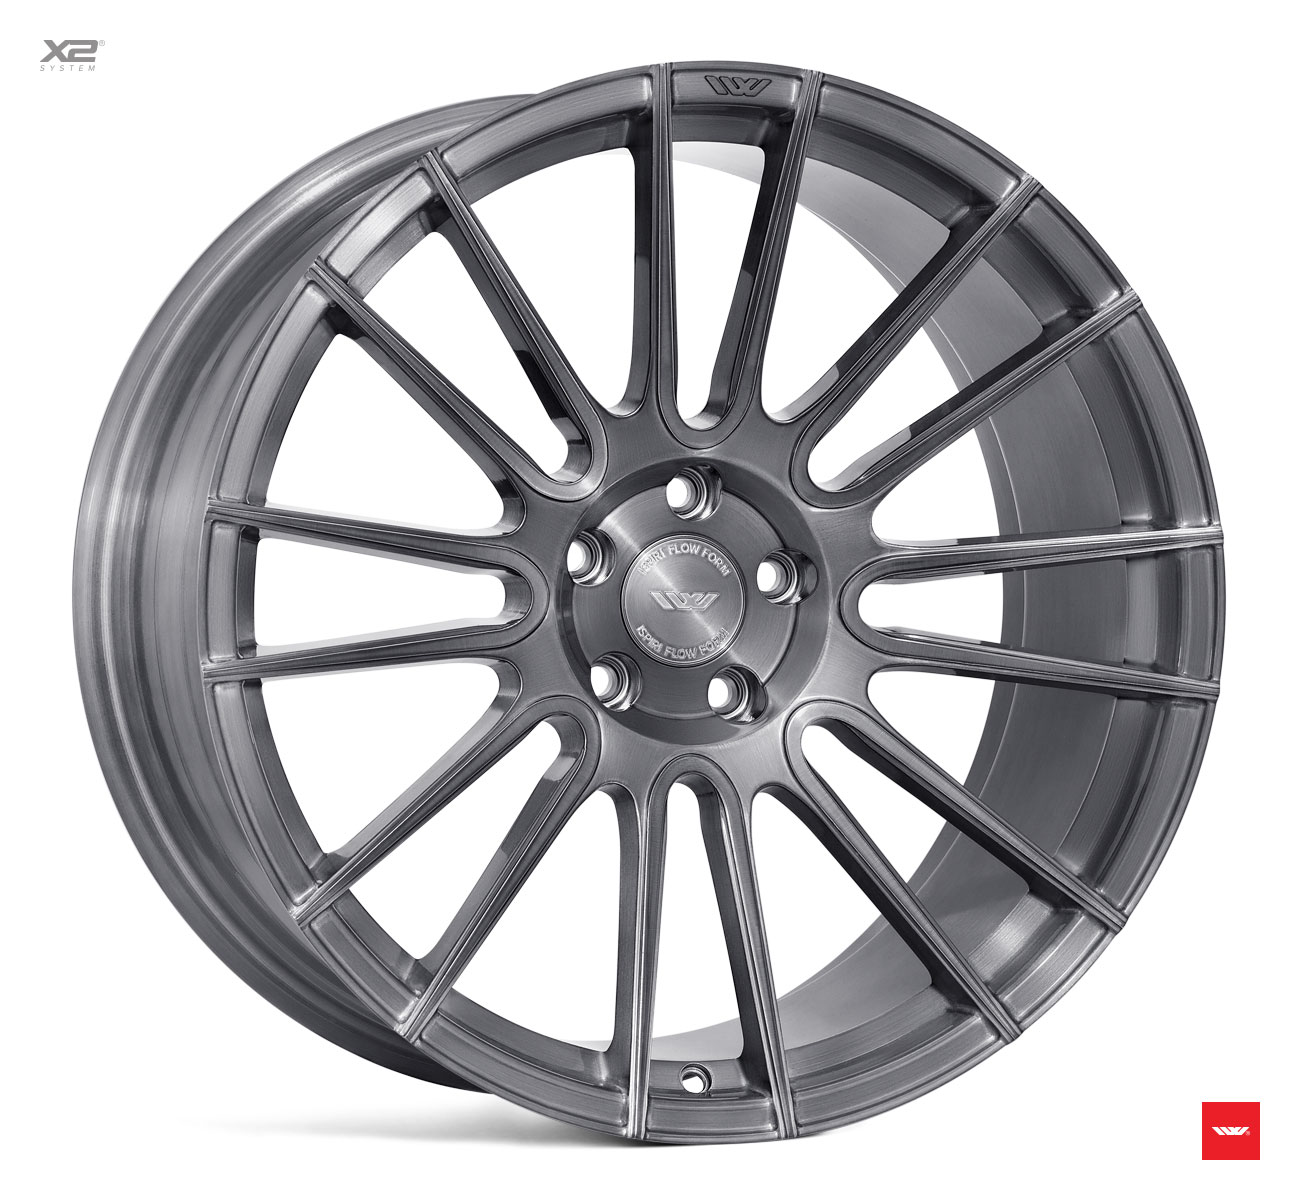 NEW 20" ISPIRI FFR8 8-TWIN CURVED SPOKE ALLOY WHEELS IN FULL BRUSHED CARBON TITANIUM, DEEP CONCAVE 9.5/10.5"